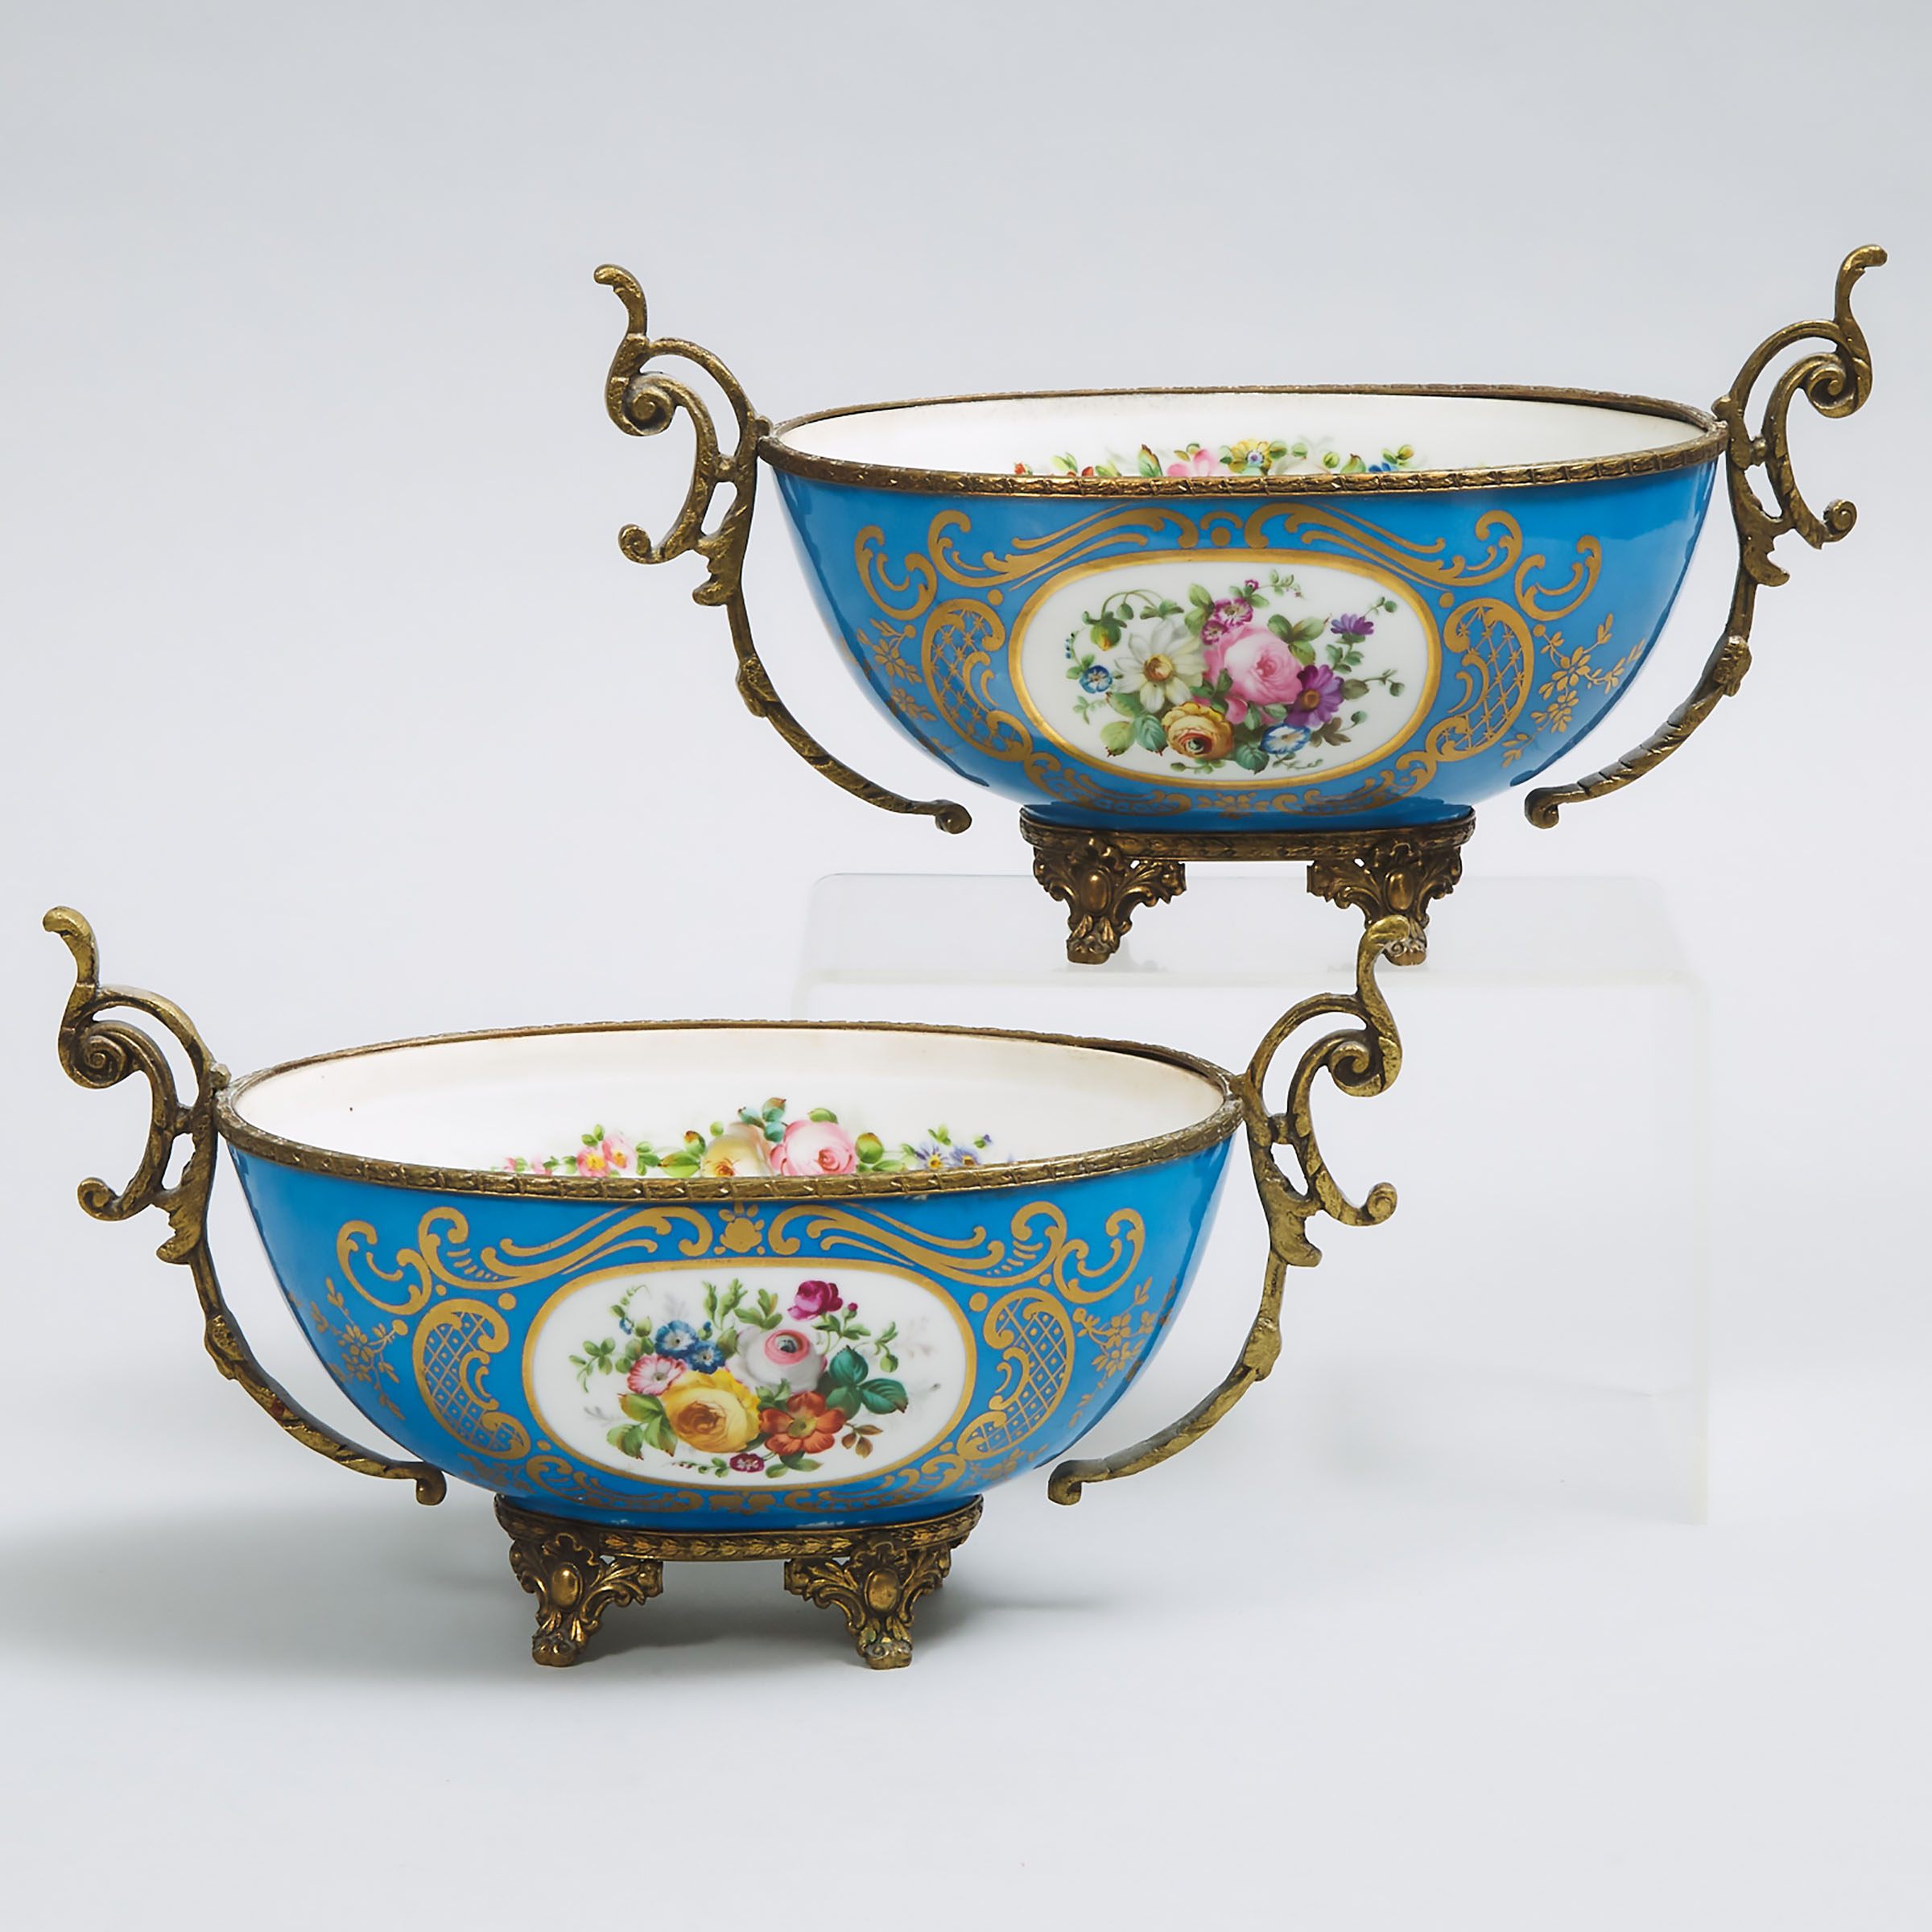 Pair of Gilt-Metal Mounted 'Sèvres' Oval Bowls, 20th century